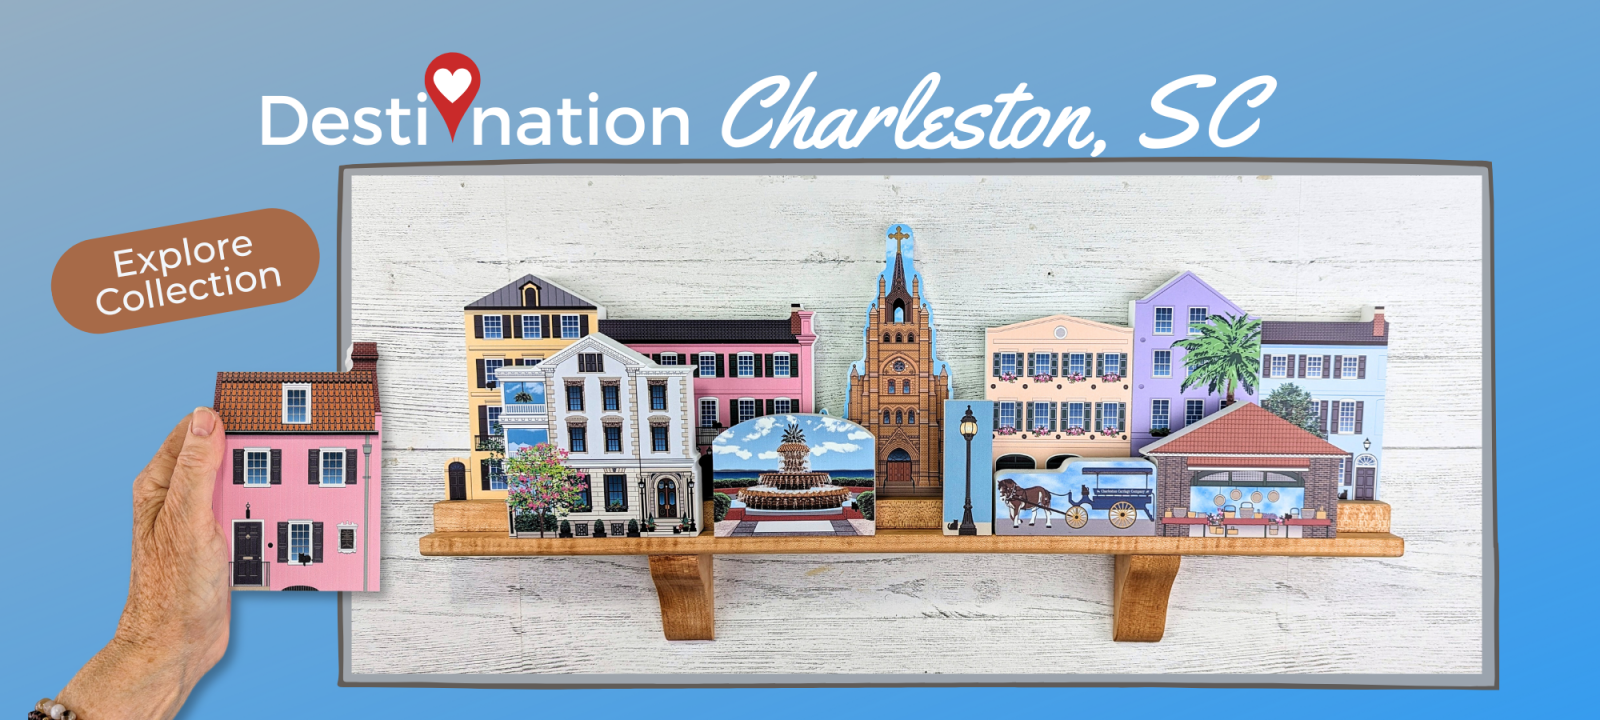 Grab your Charleston, South Carolina souvenirs here. Keep memories of the beautiful southern architecture.